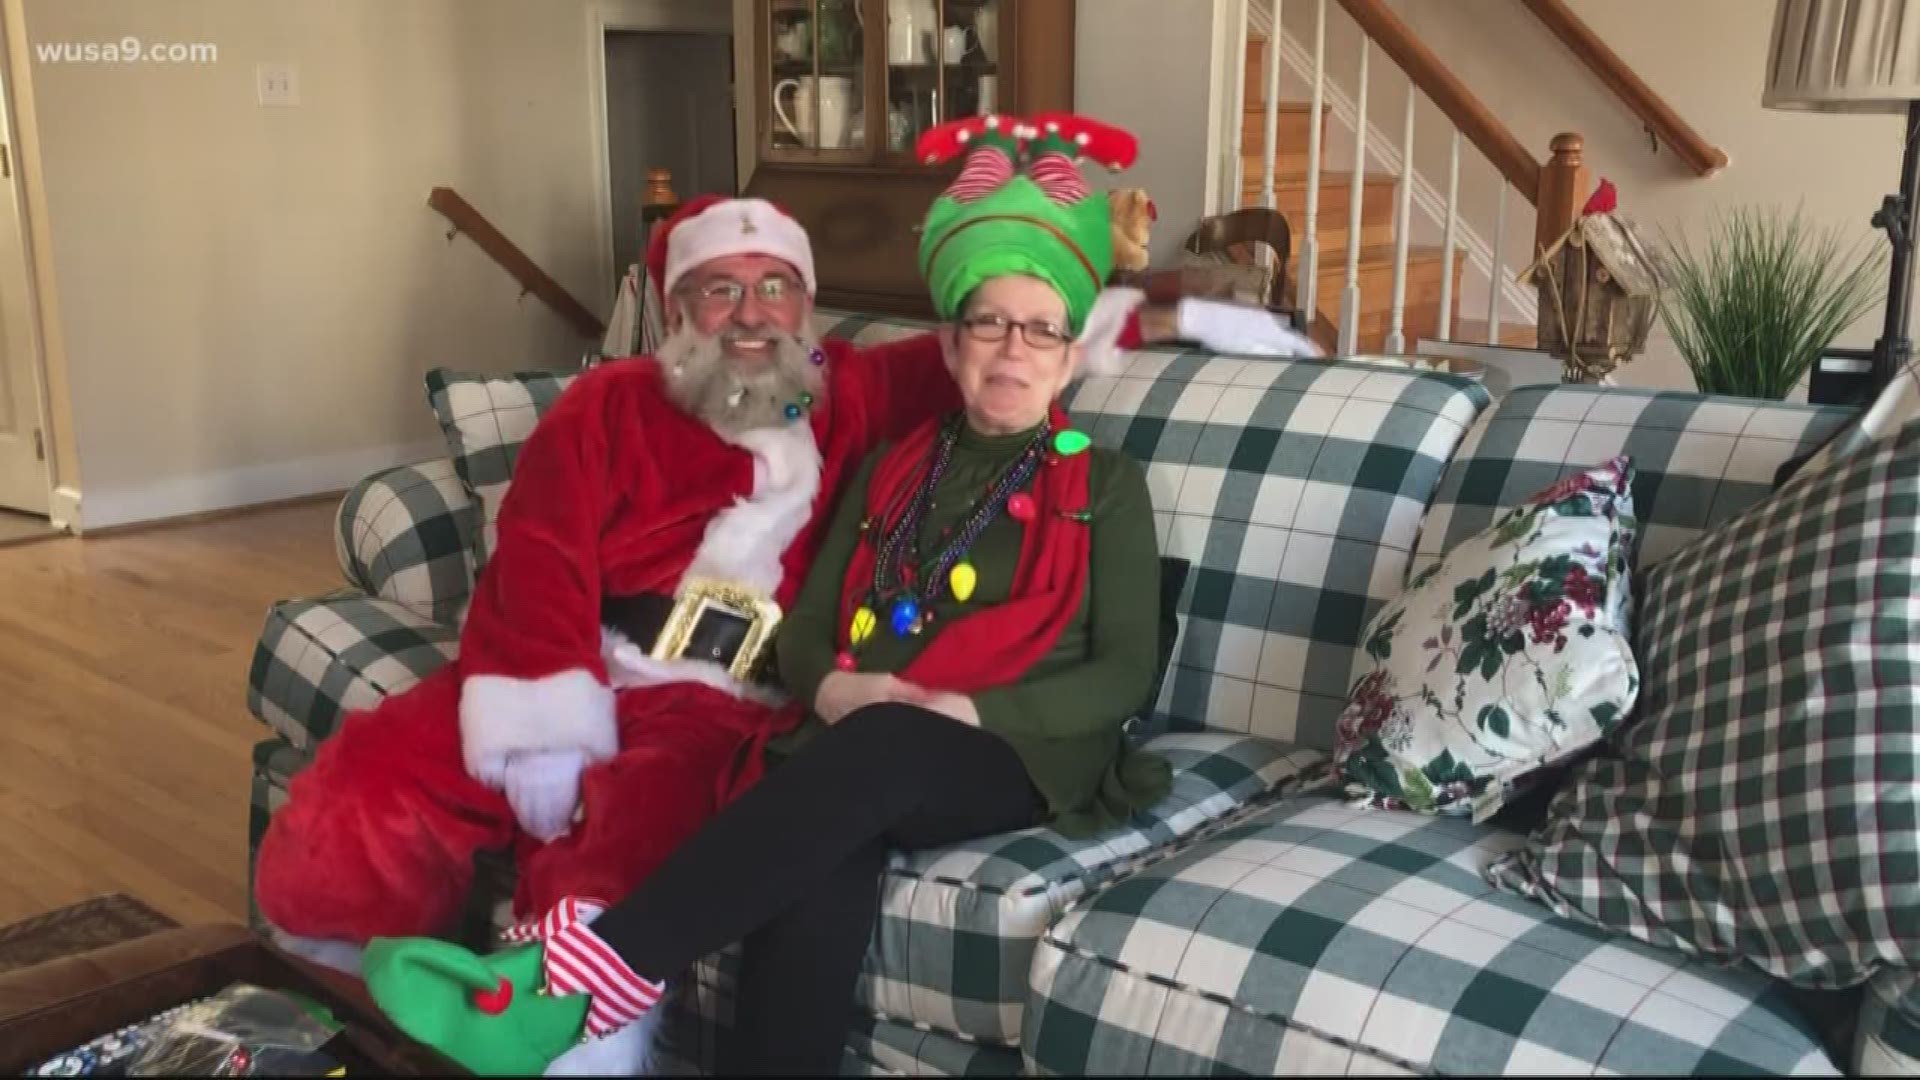 With a great beard and a wife as an elf, one Jewish man is playing Sante and helping a few local shelters celebrate Christmas.